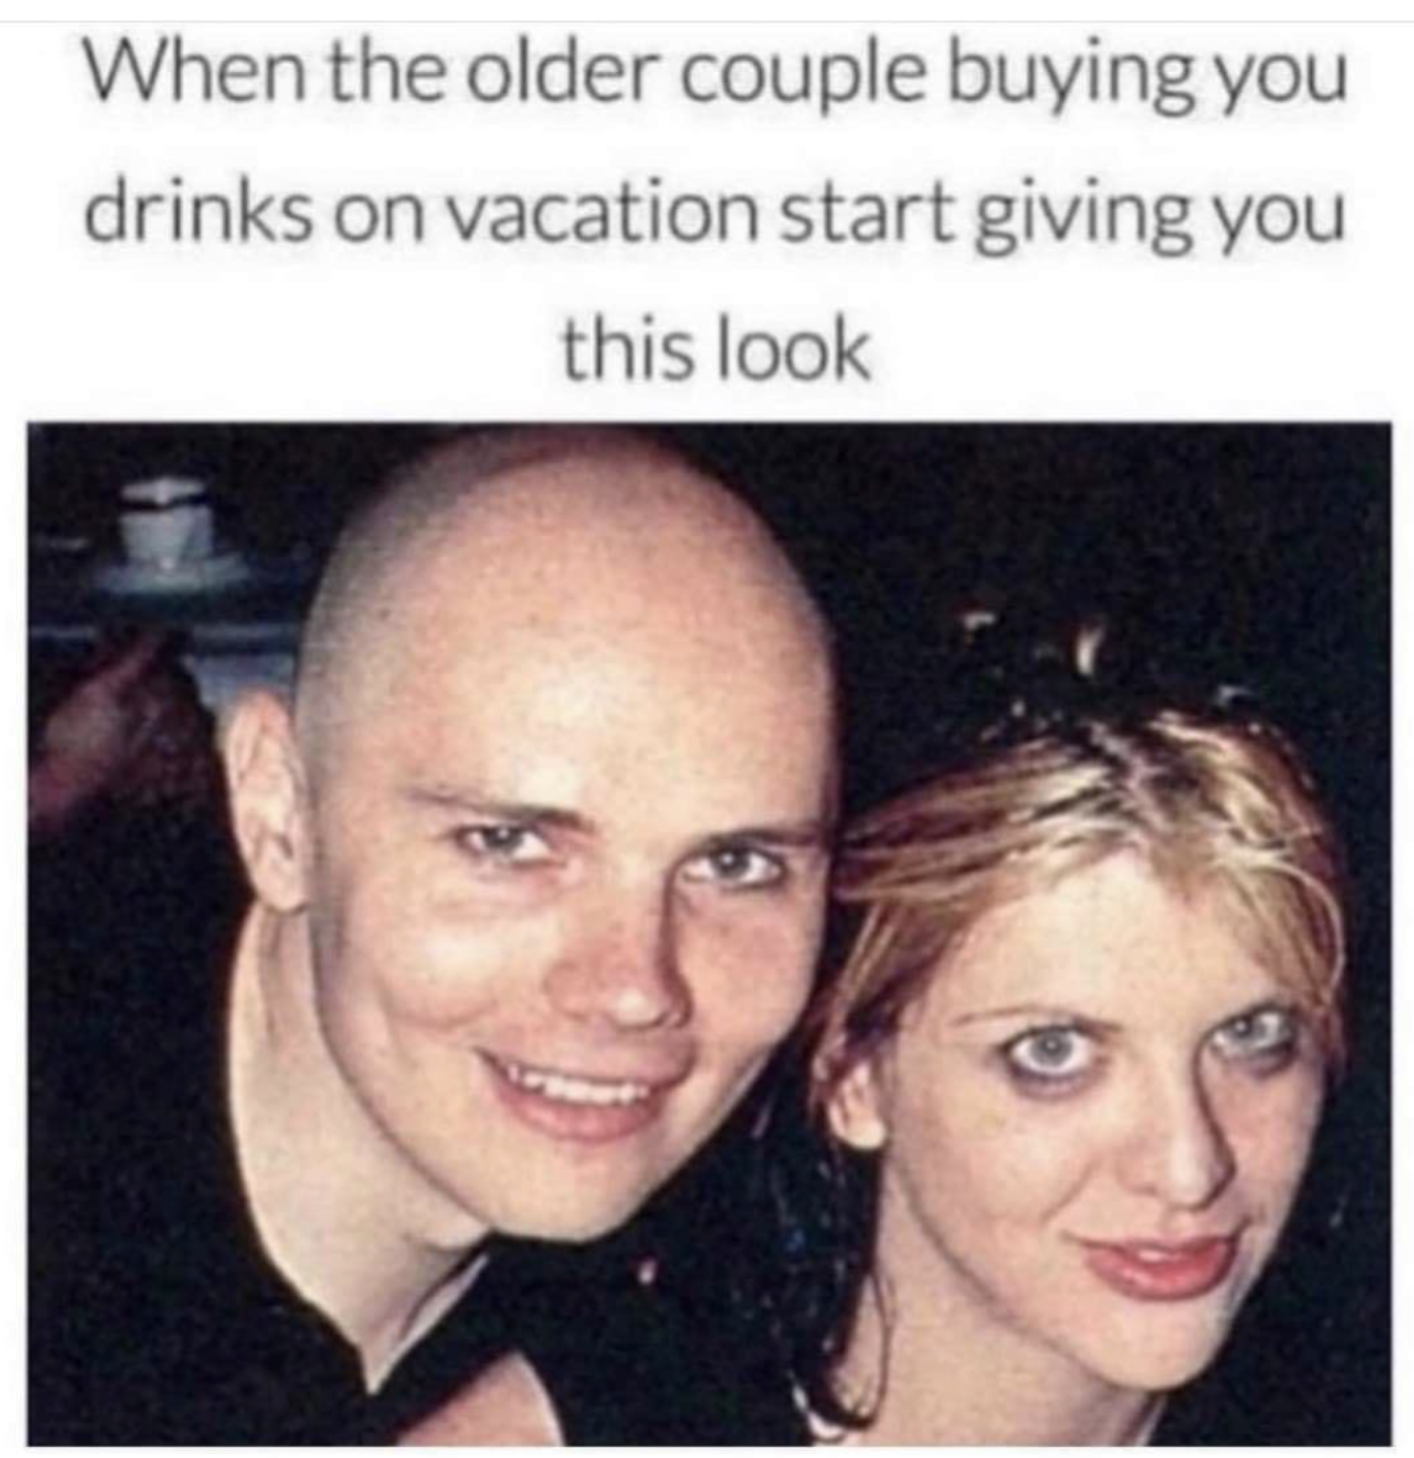 photo caption - When the older couple buying you drinks on vacation start giving you this look